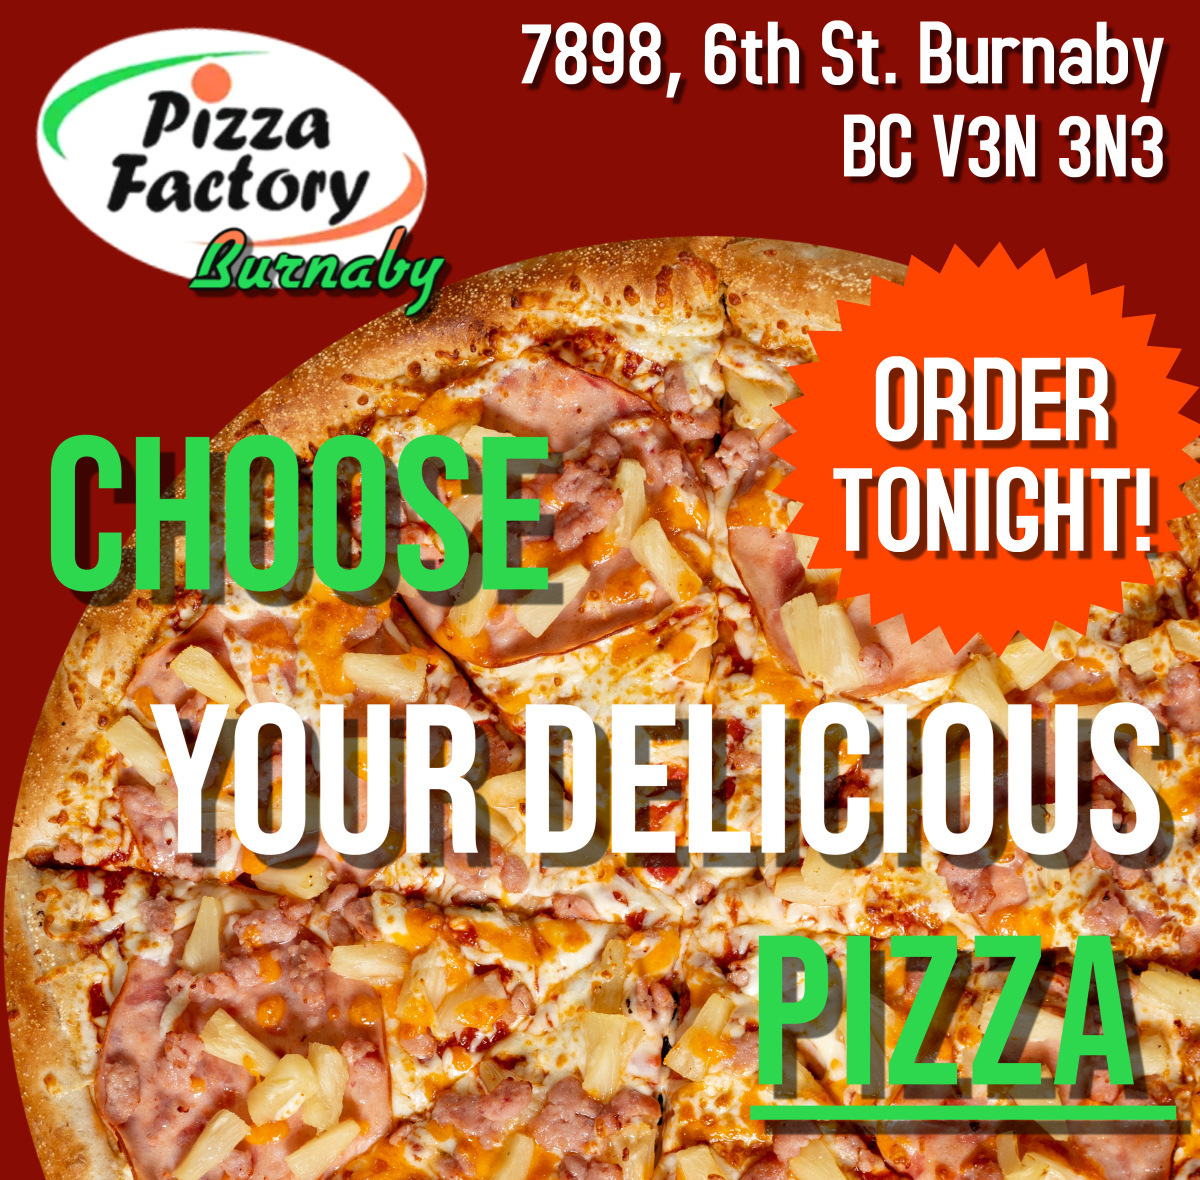 Pizza Factory Burnaby